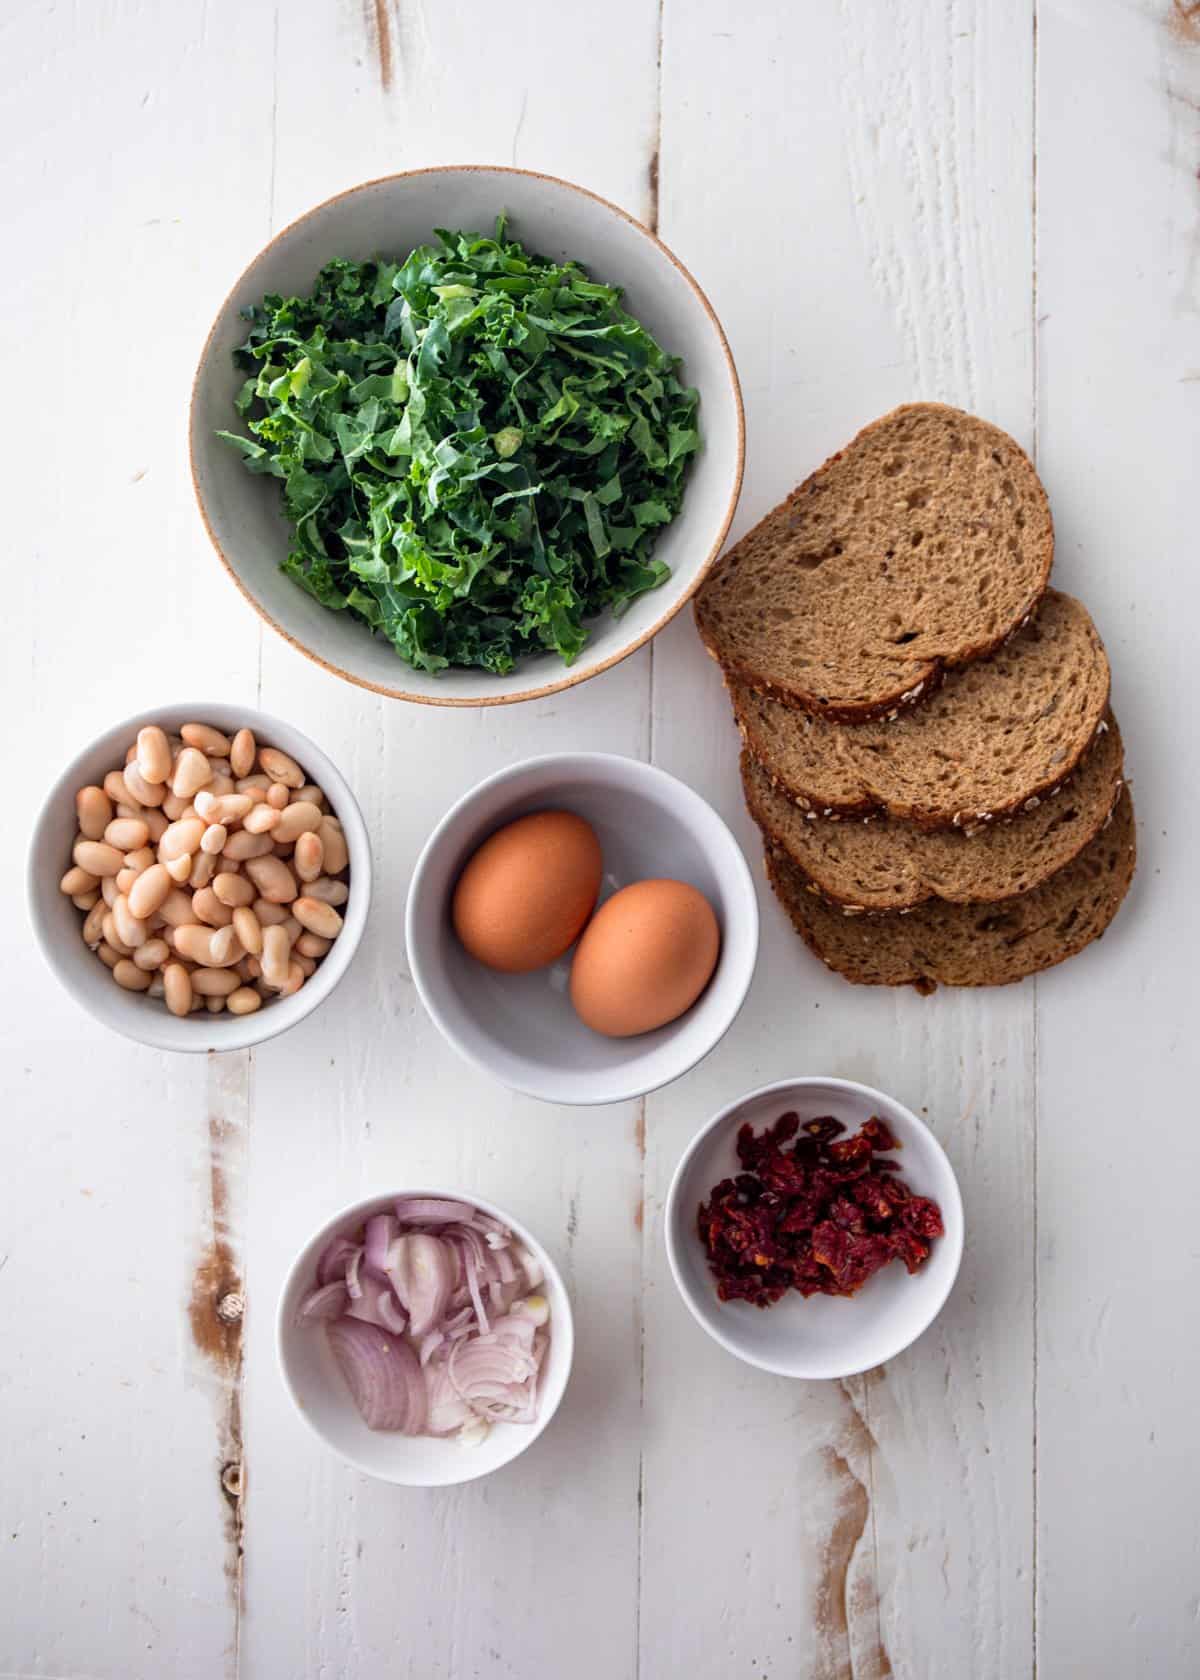 bread, beans, kale, shallots, eggs and peppers in small bowls on a white table